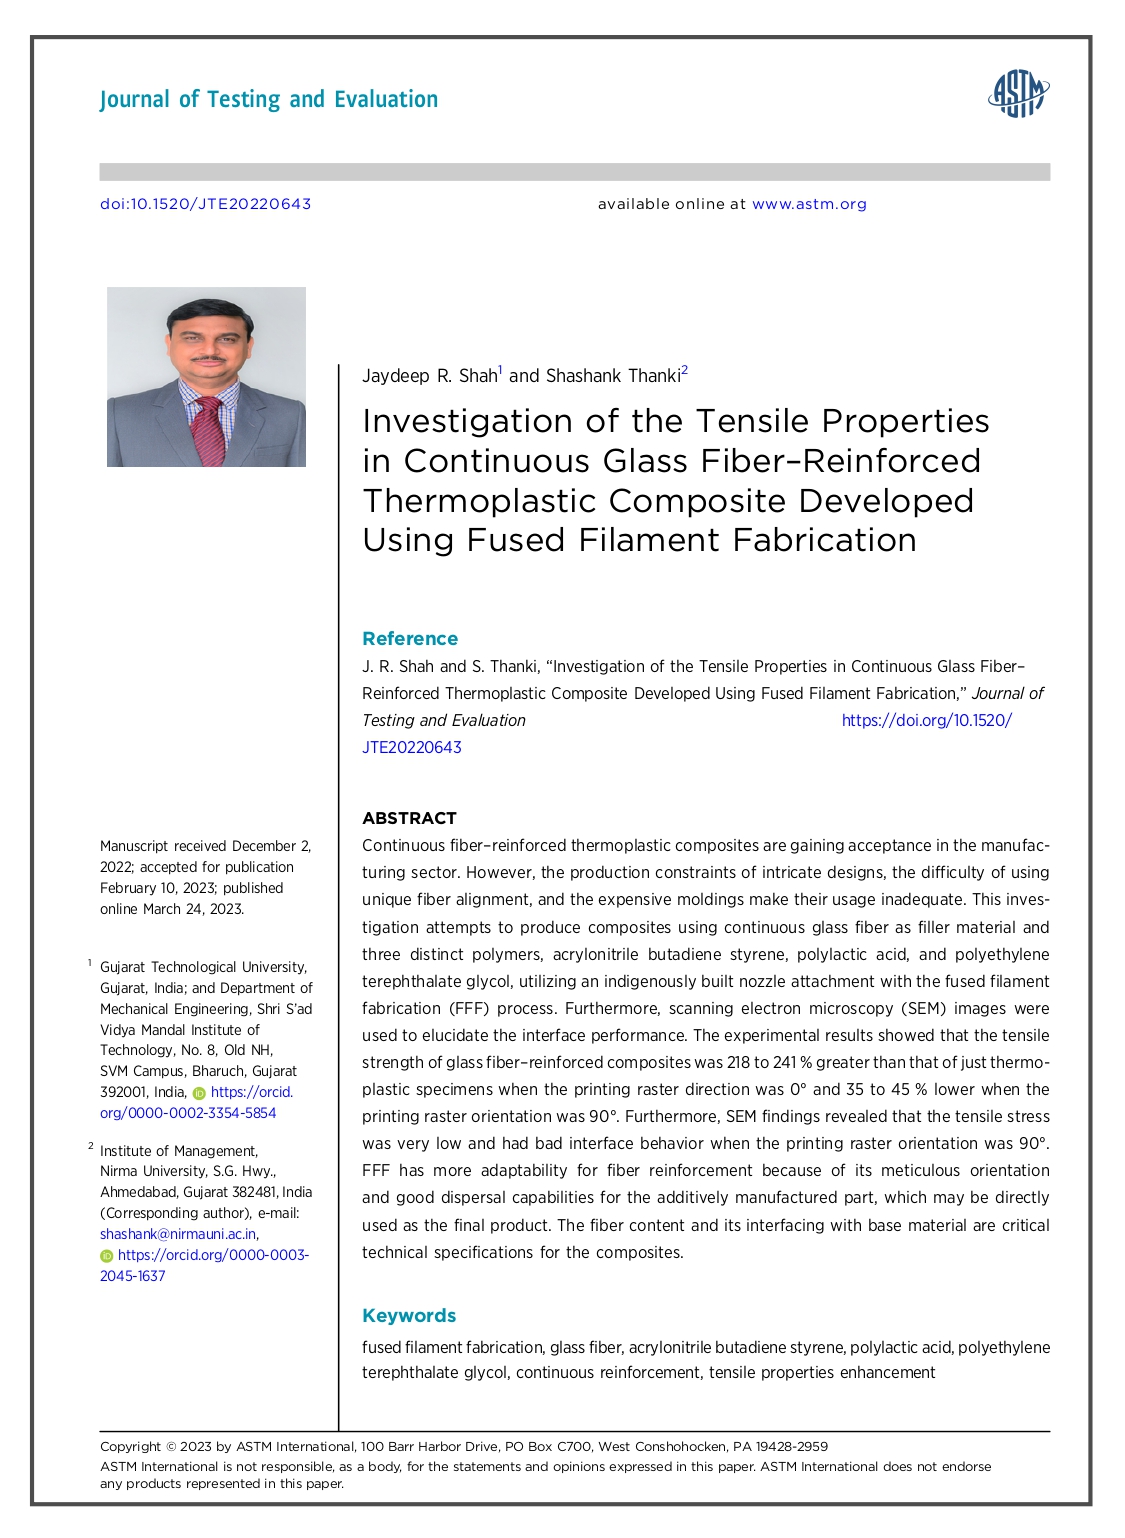 Investigation of the Tensile Properties in Continuous Glass Fiber–Reinforced Thermoplastic Composite Developed Using Fused Filament Fabrication